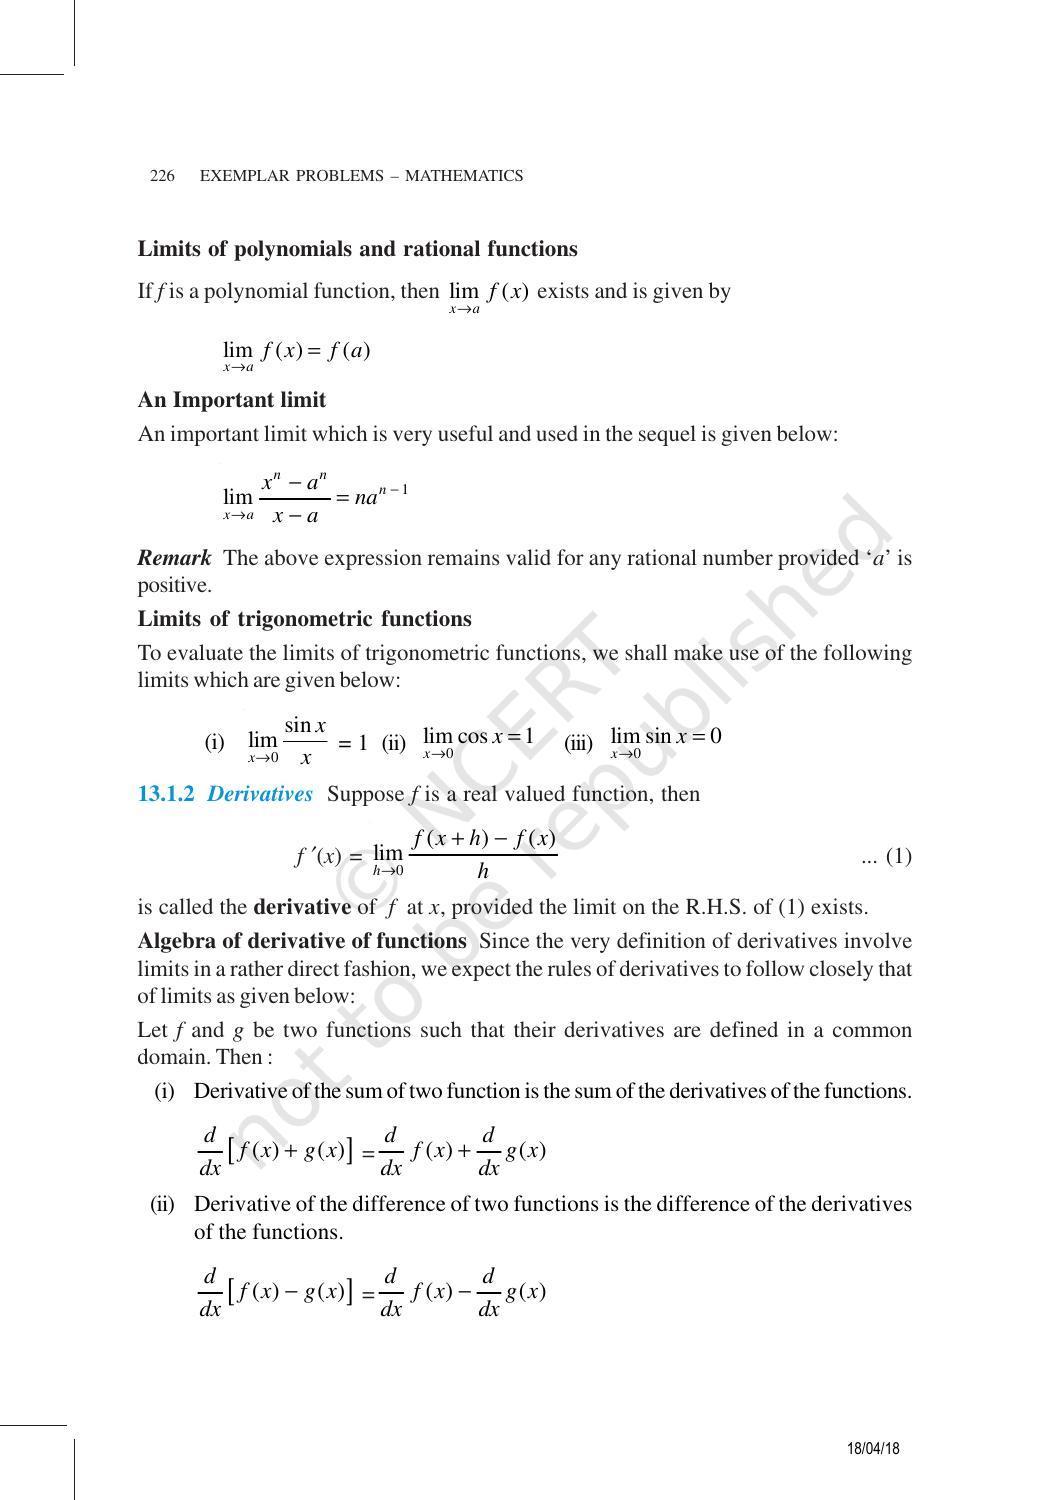 NCERT Exemplar Book for Class 11 Maths: Chapter 13 Limits and Derivatives - Page 2